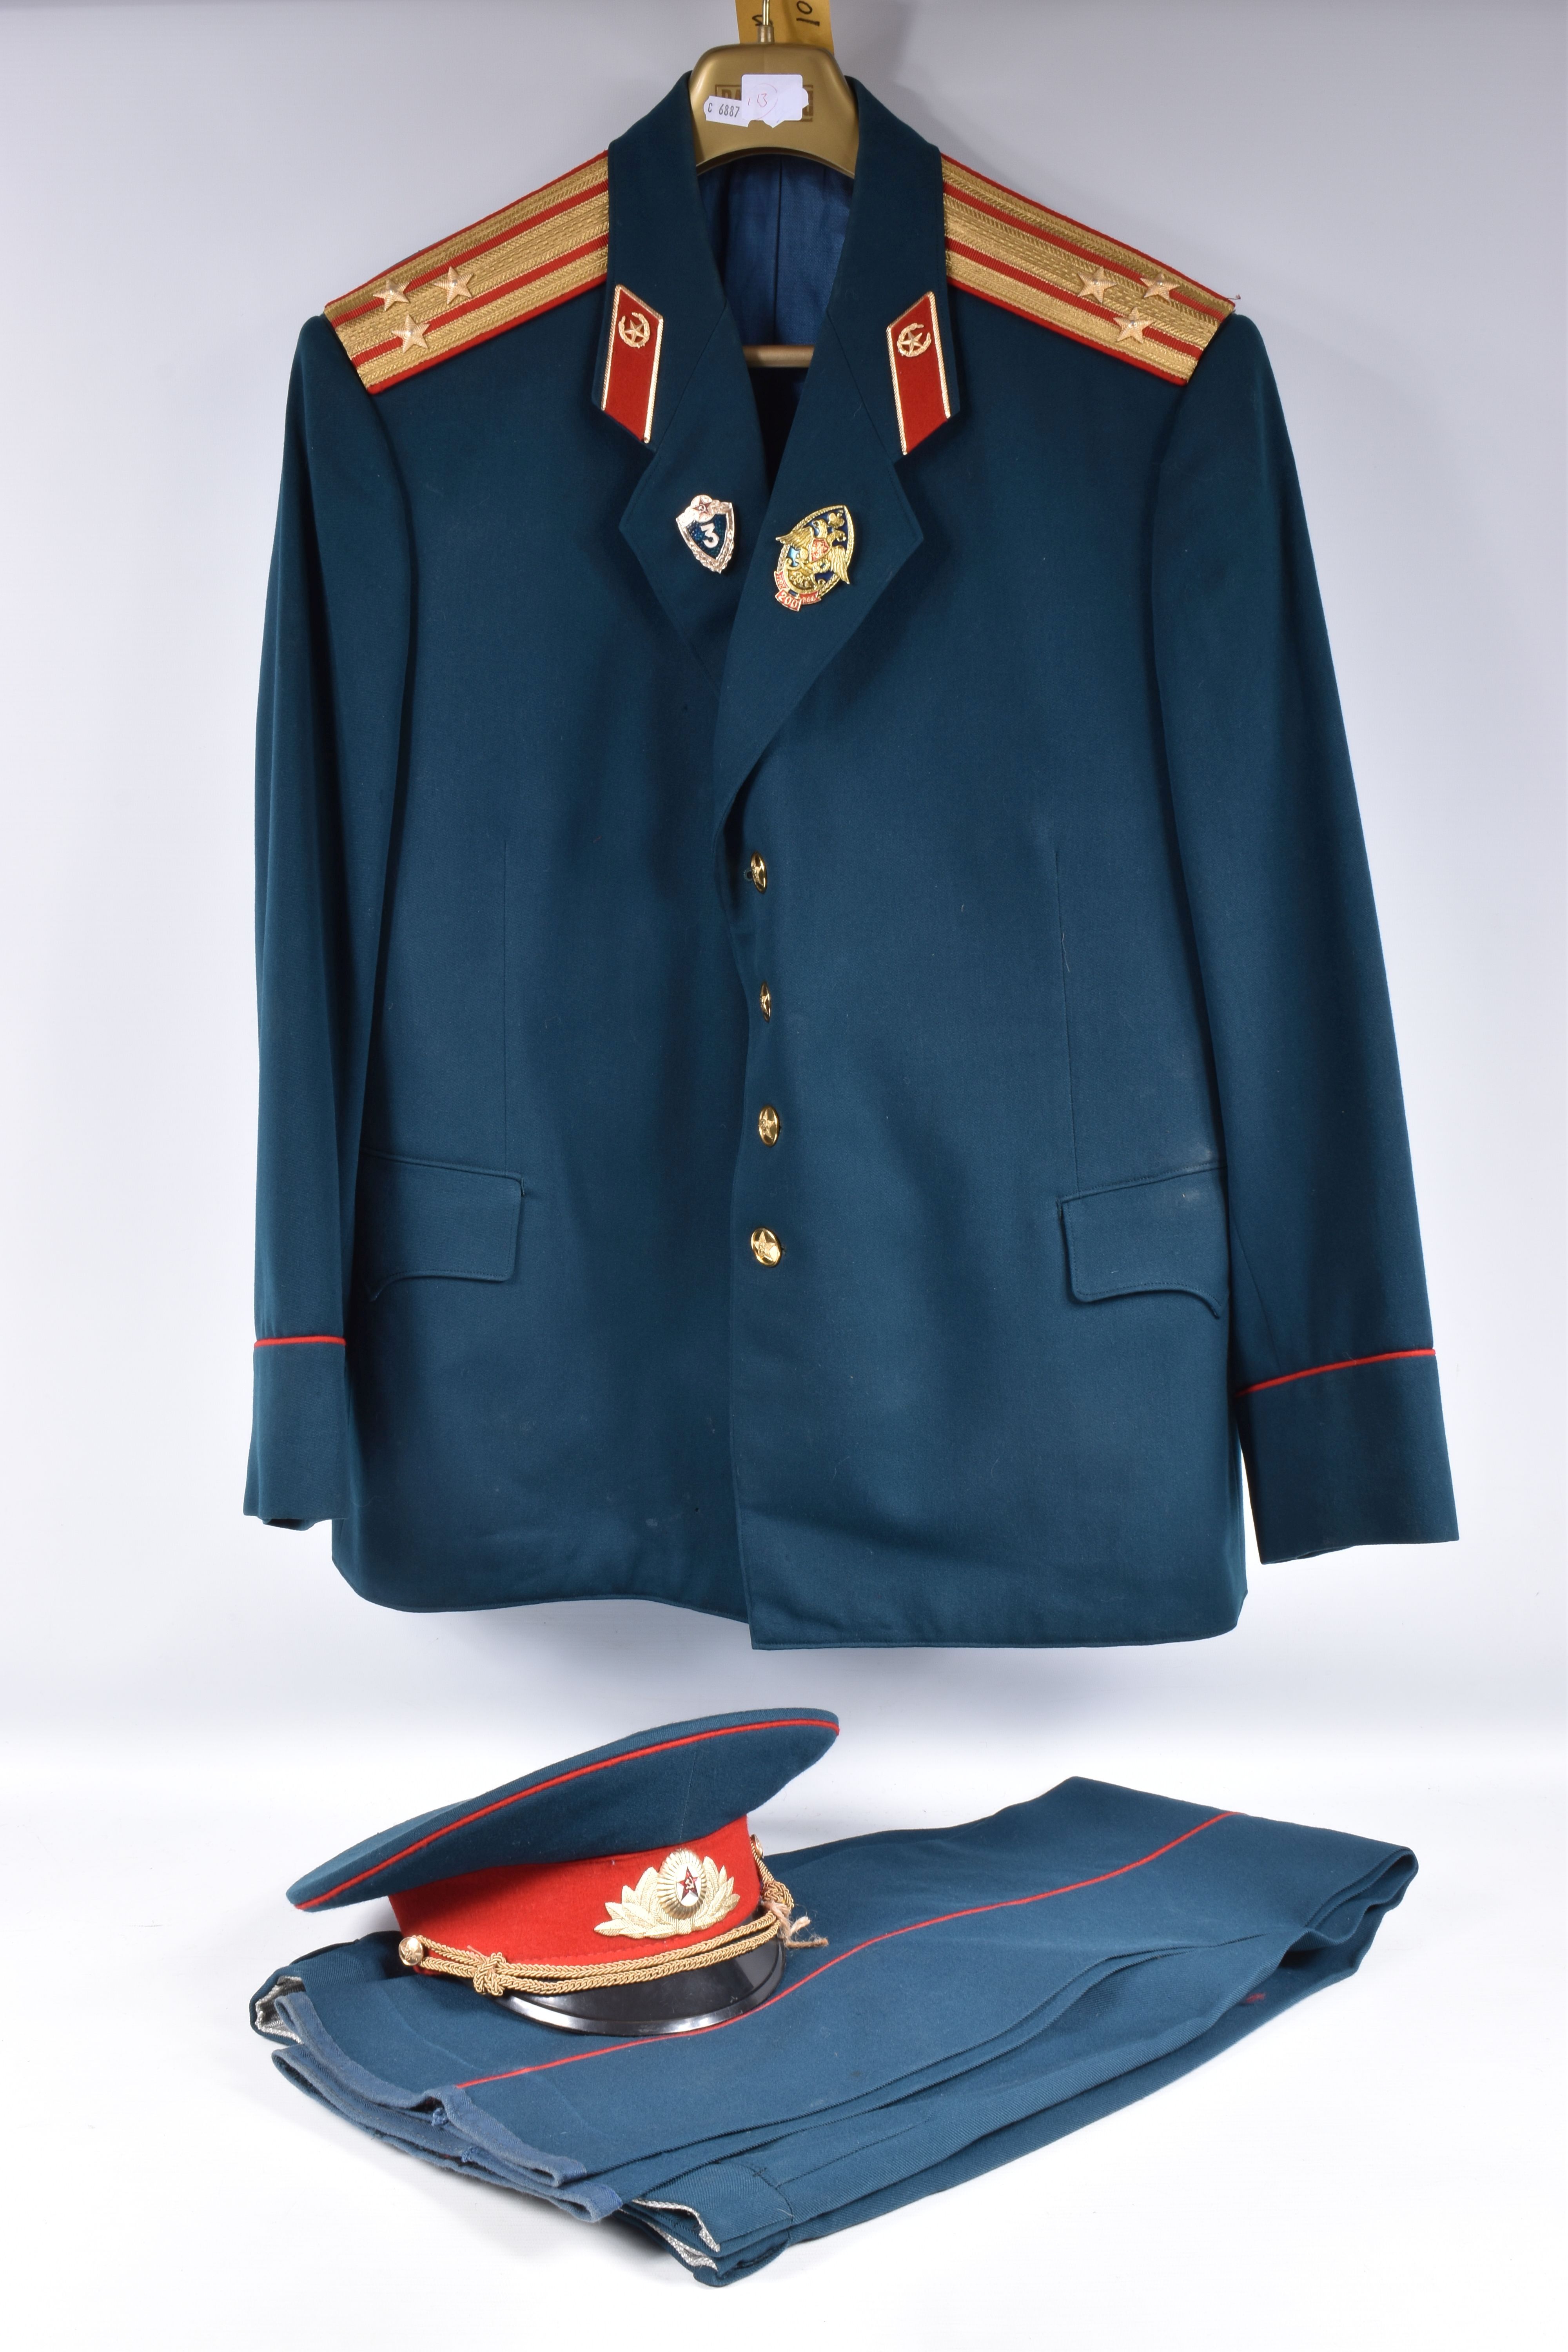 A RUSSIAN ARMY COLONELS UNIFORM, comprising of a tunic , trousers and a hat, the uniform is green